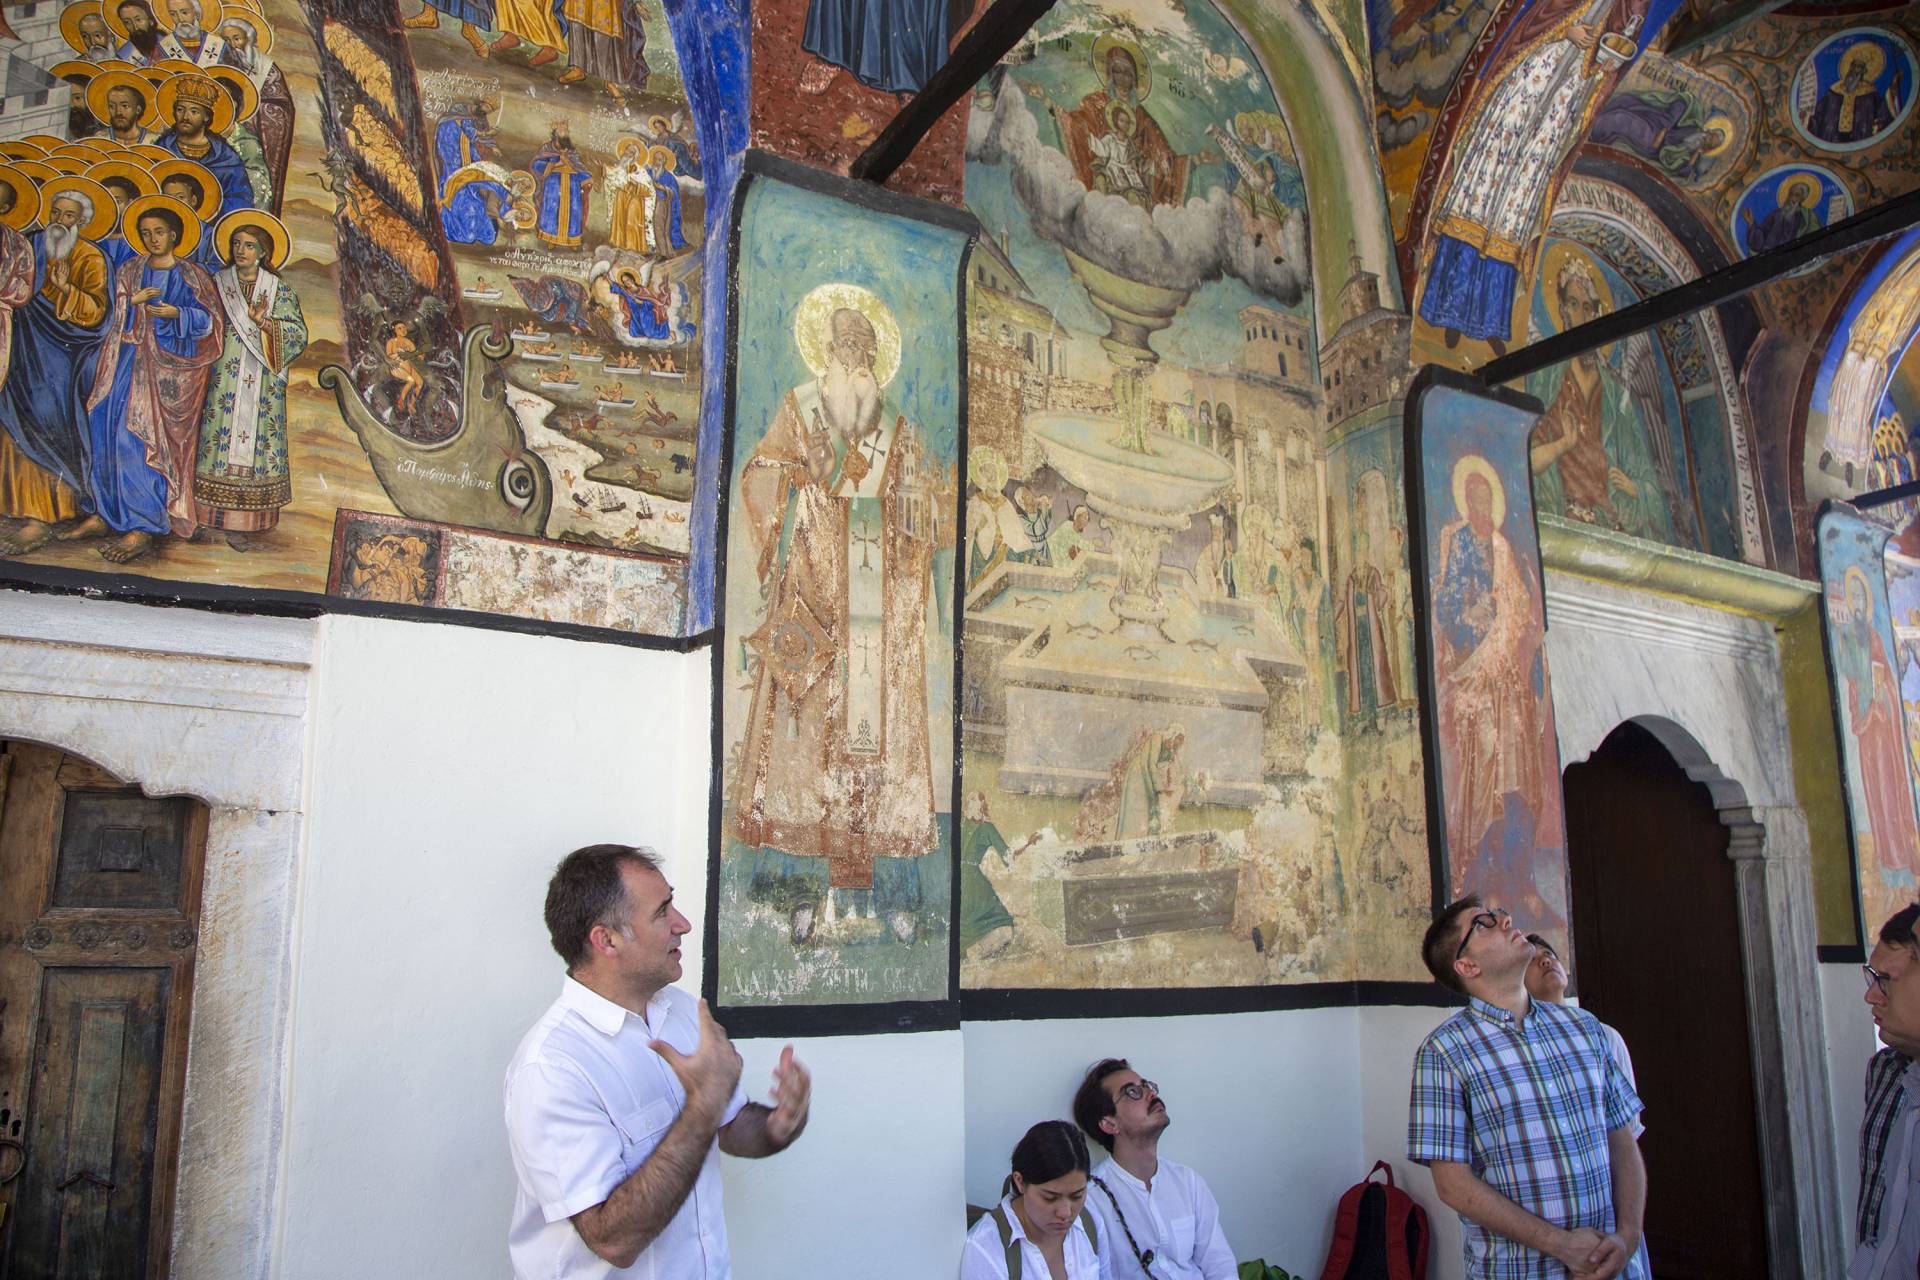 A lecturer talks about the Byzantine paintings on the walls of the monastery